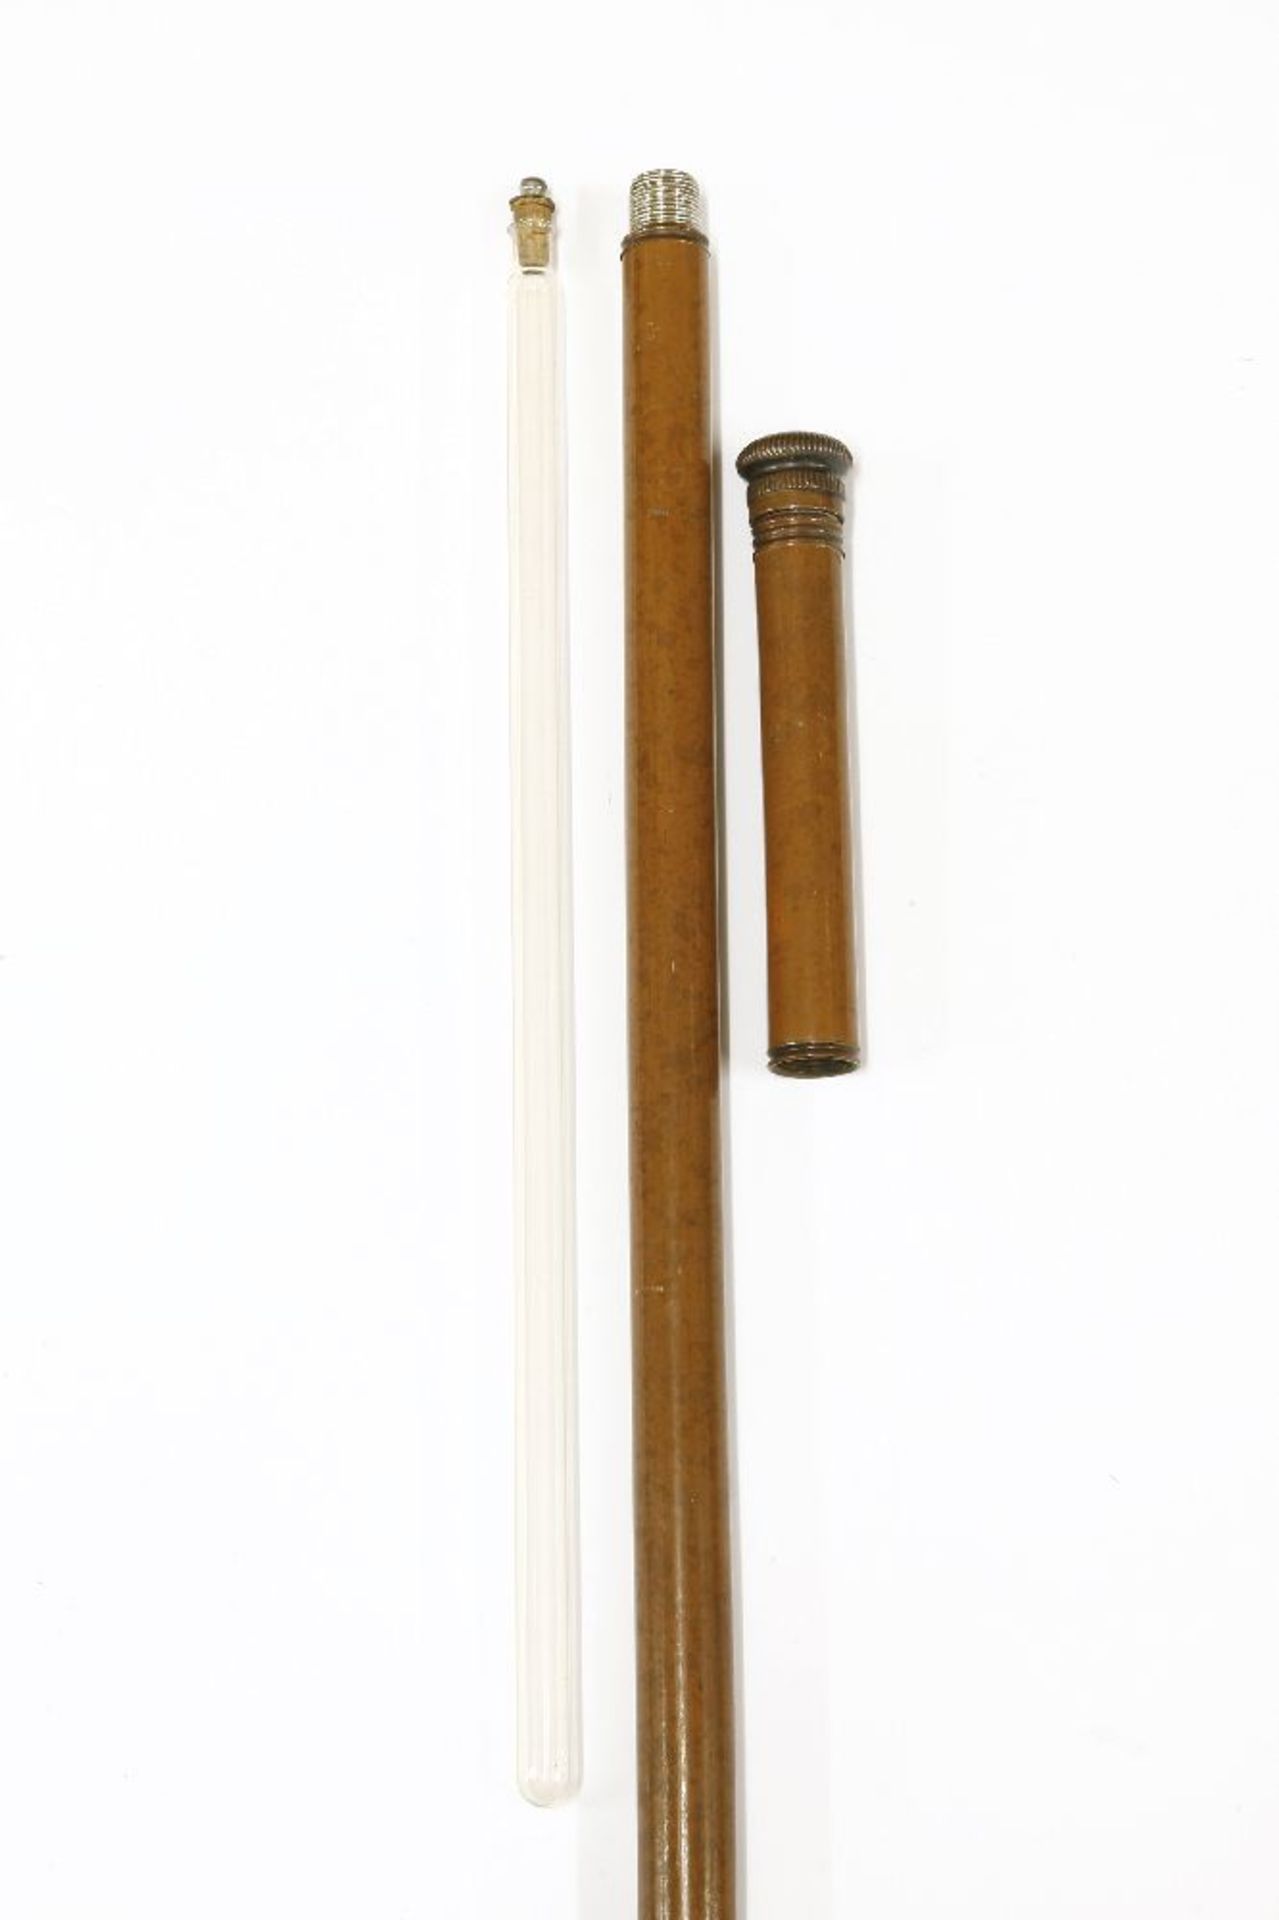 A malacca walking cane,containing a glass vessel, 40cm long, with a stopper in the lower part of the